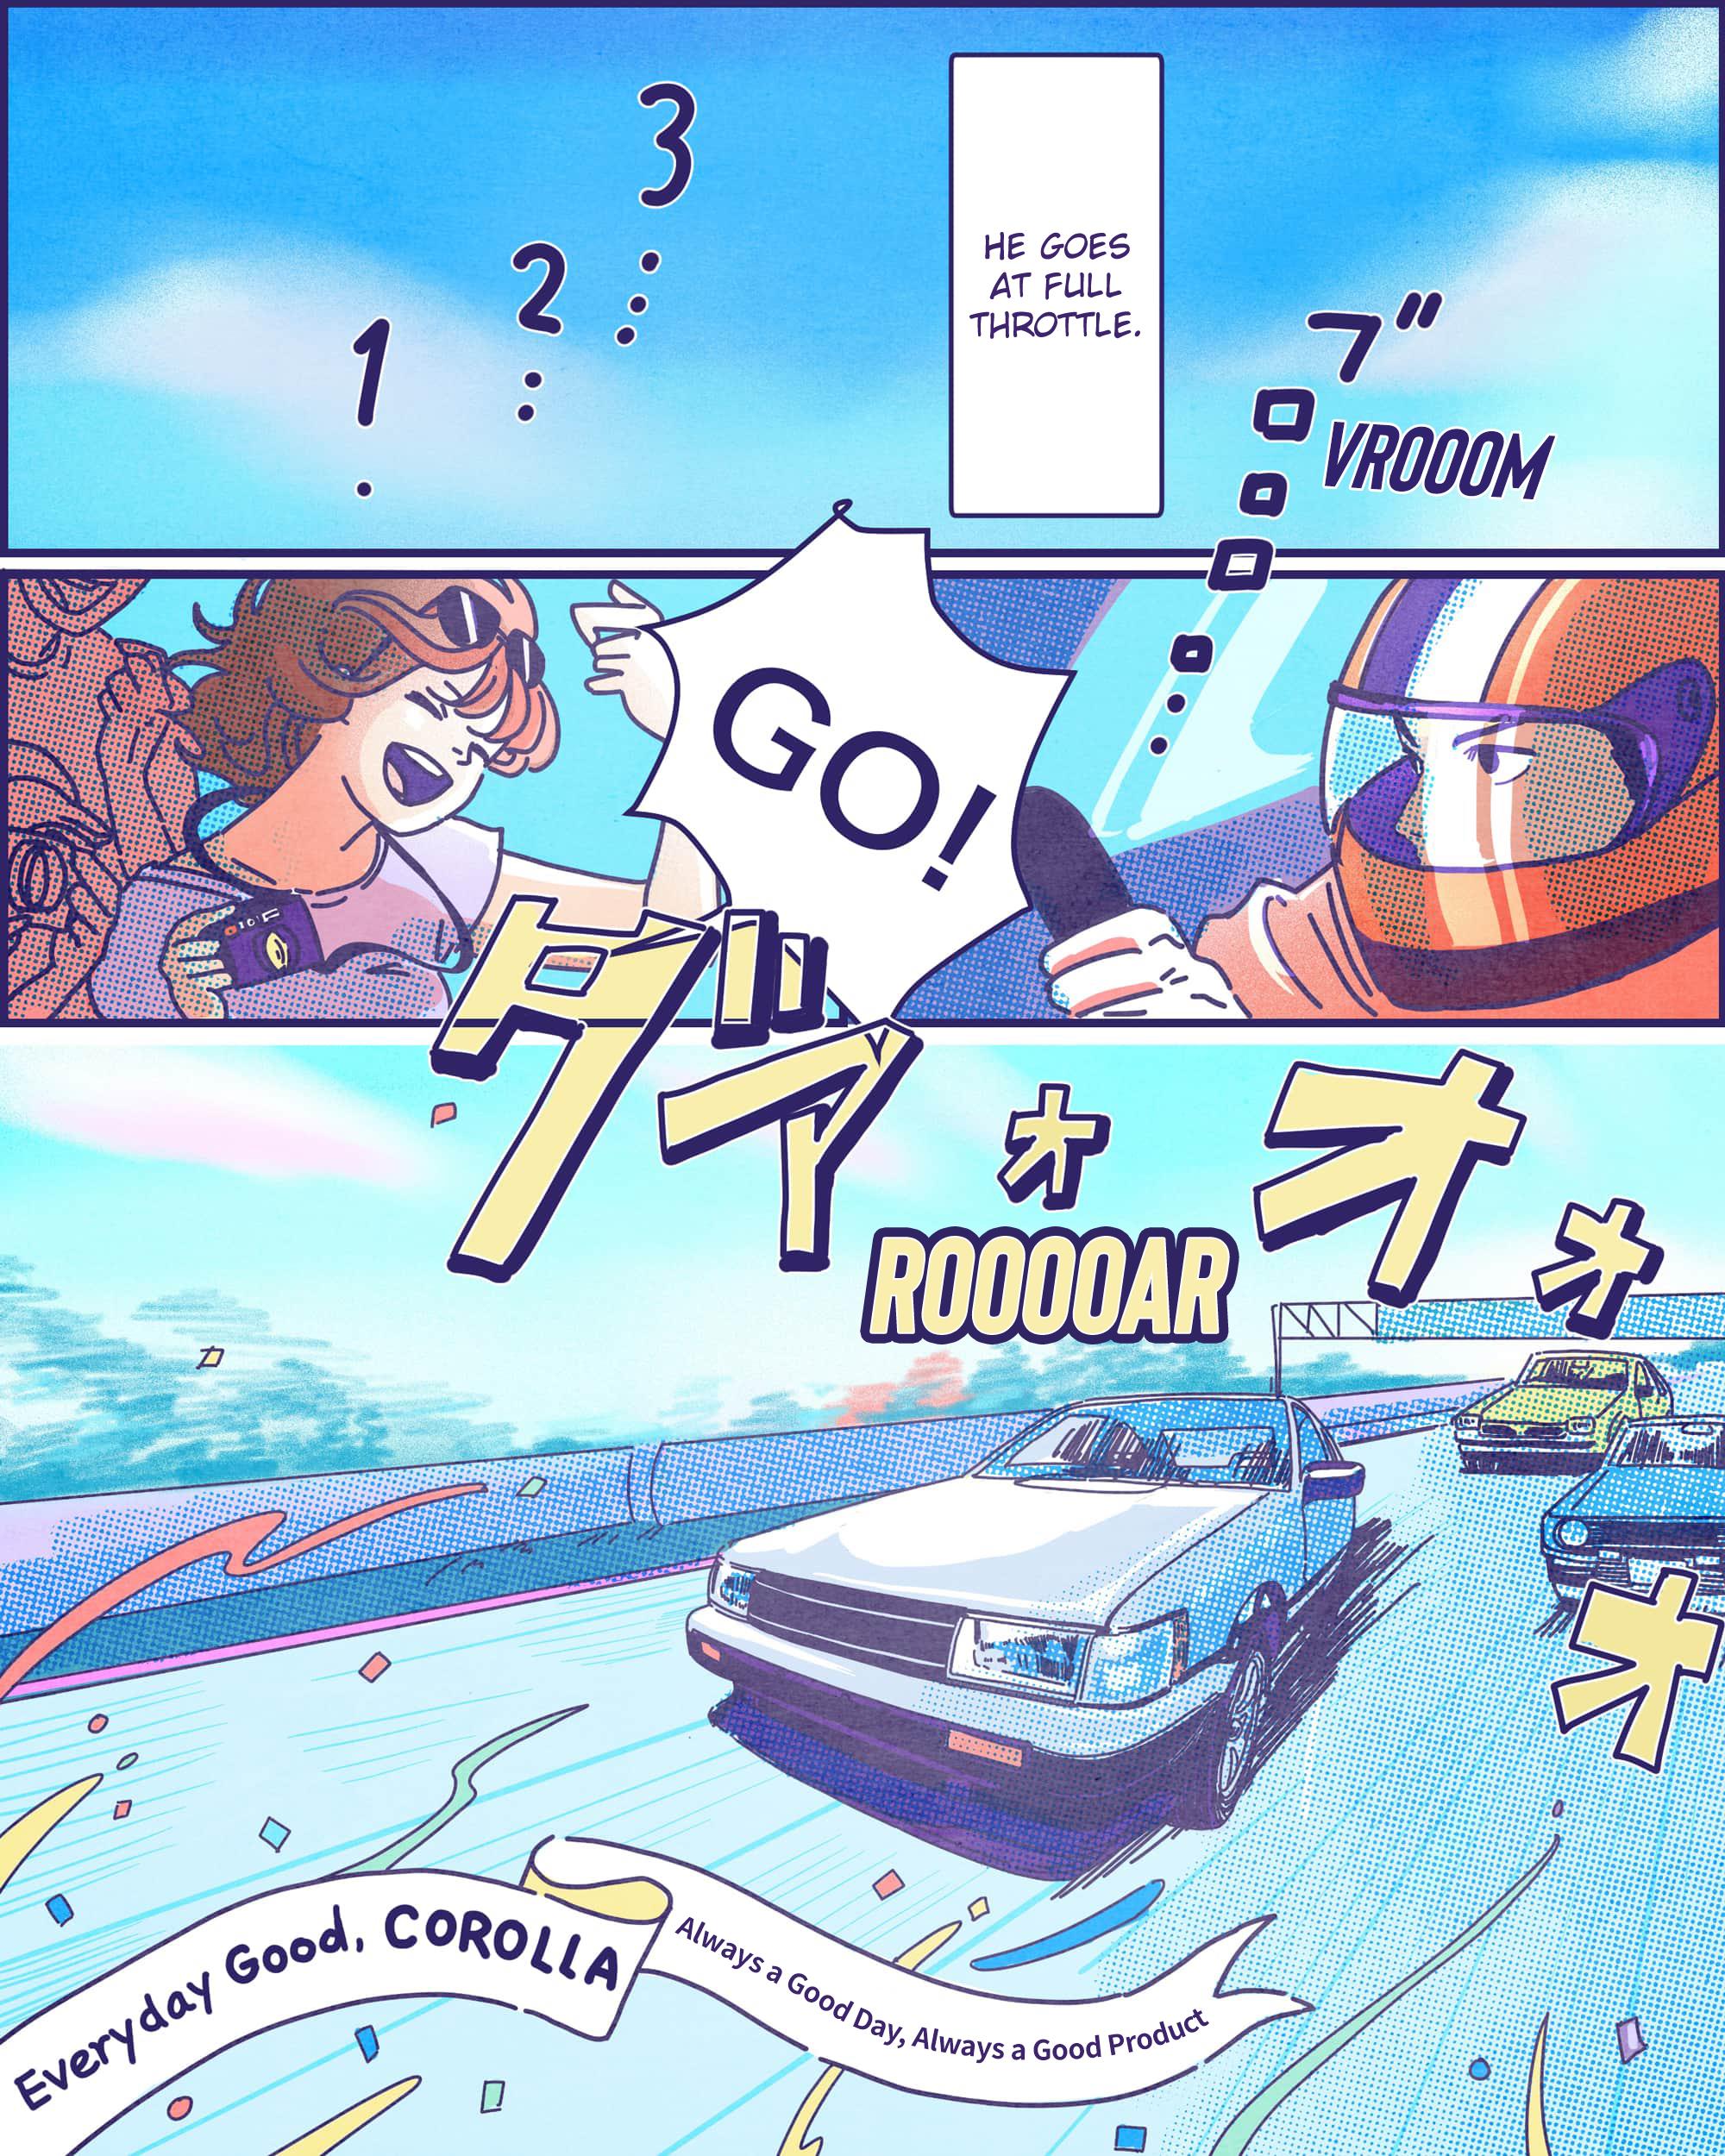 Everyday Good, Corolla - Page 4